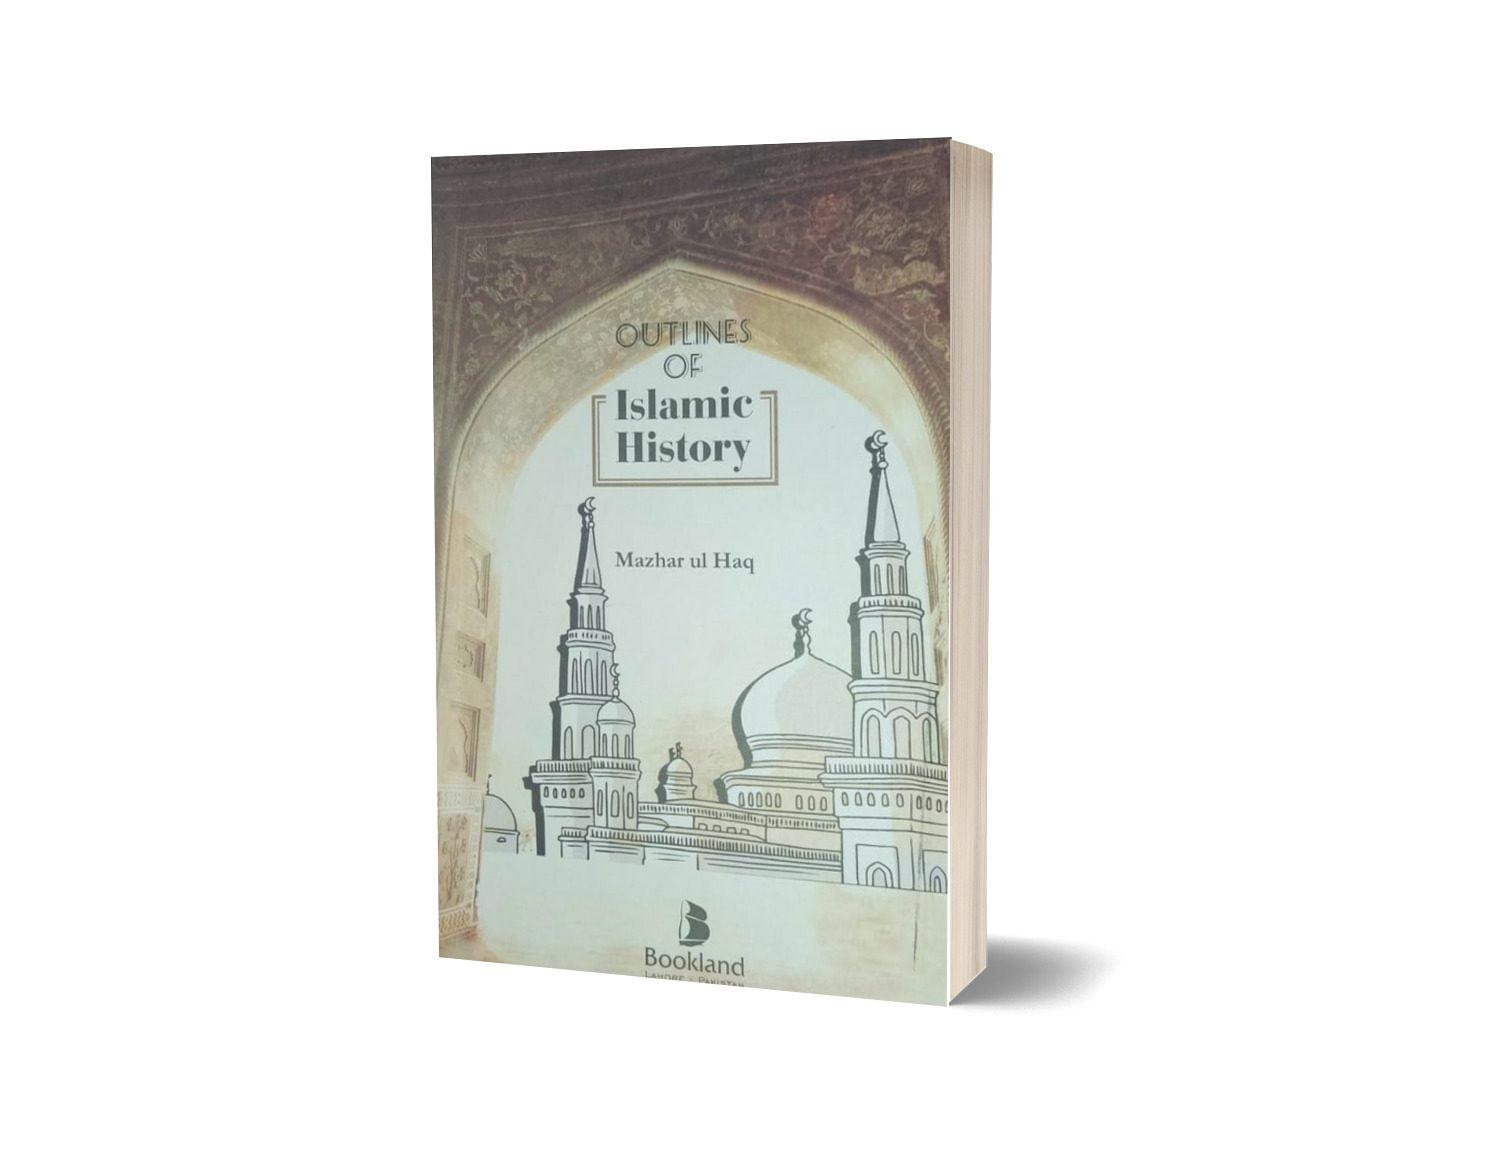 Out Line Of Islamic History By Mazhar ul Haq